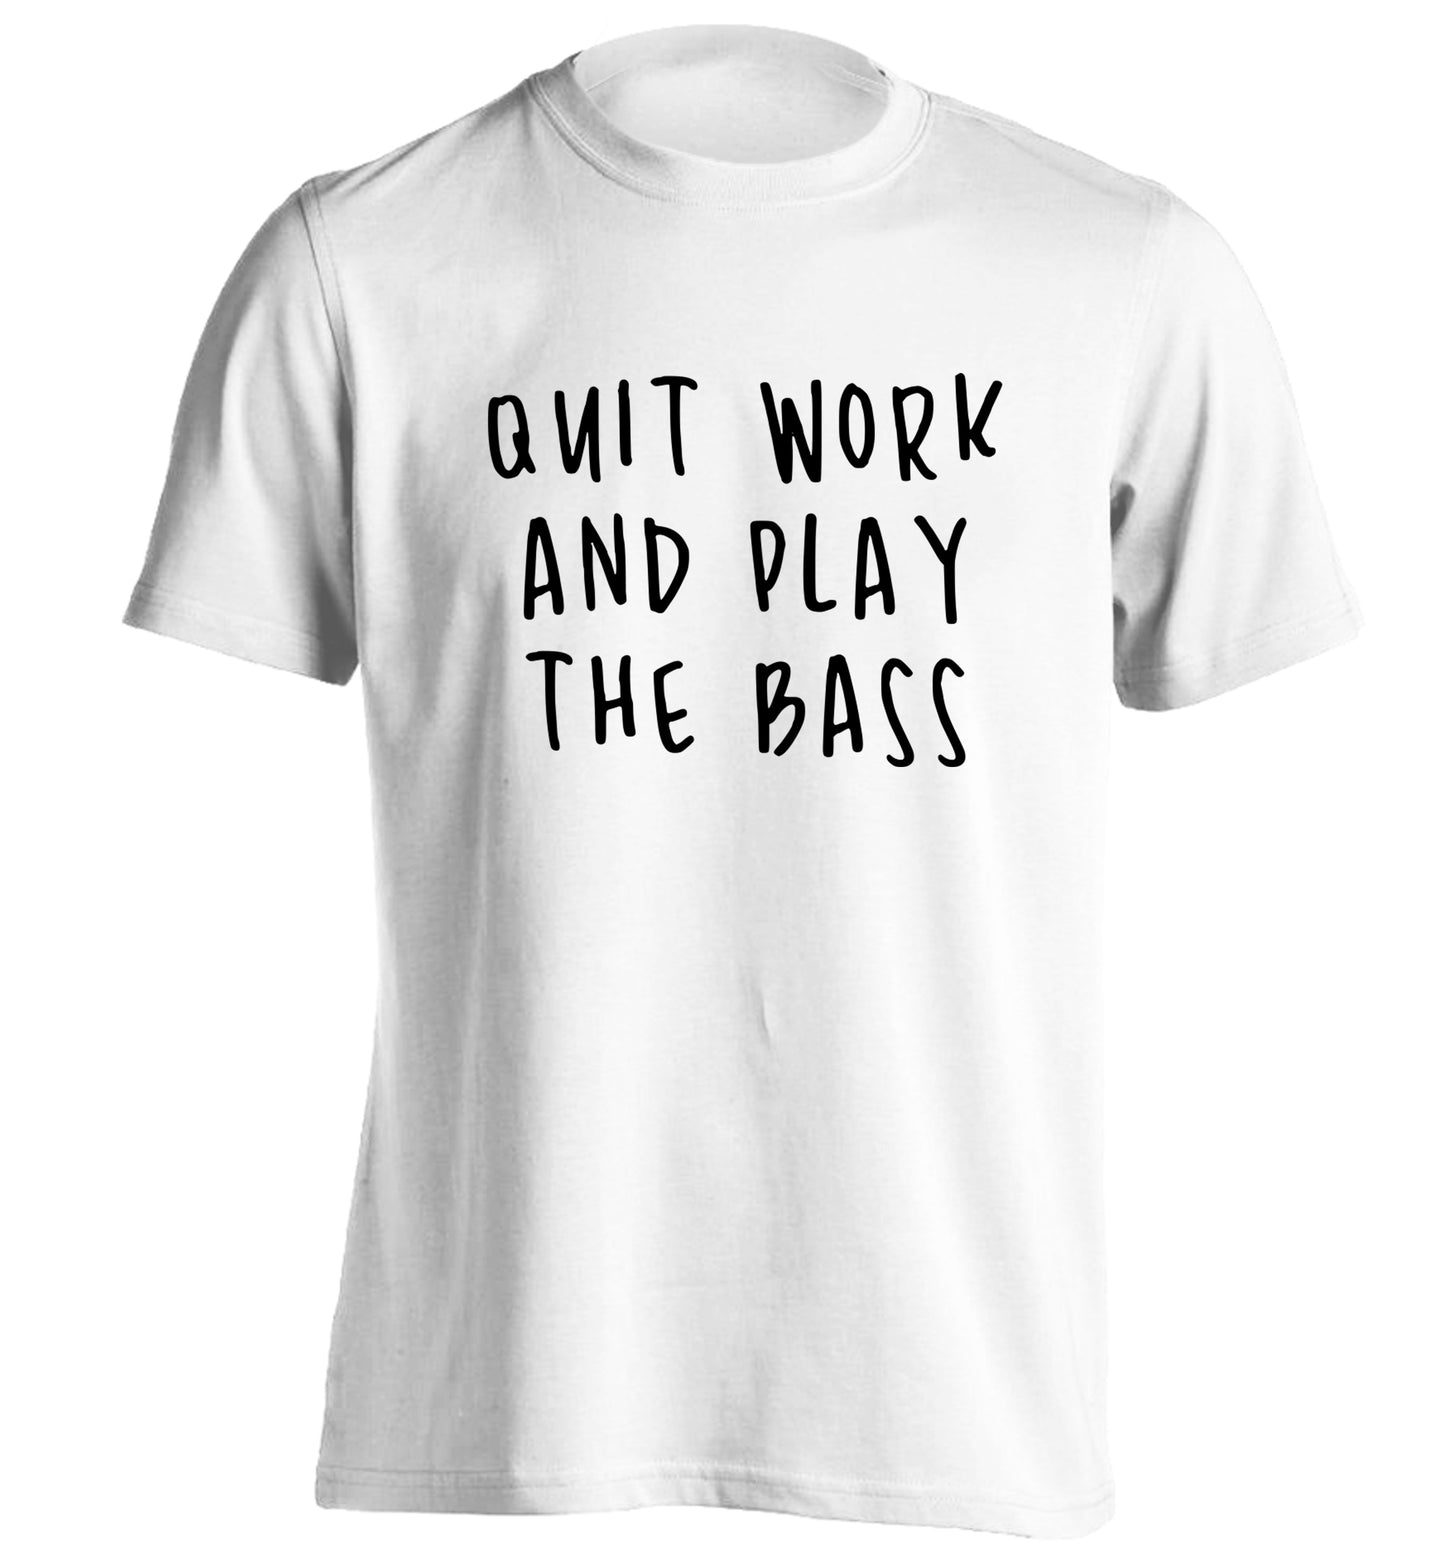 Quit work and play the bass adults unisex white Tshirt 2XL